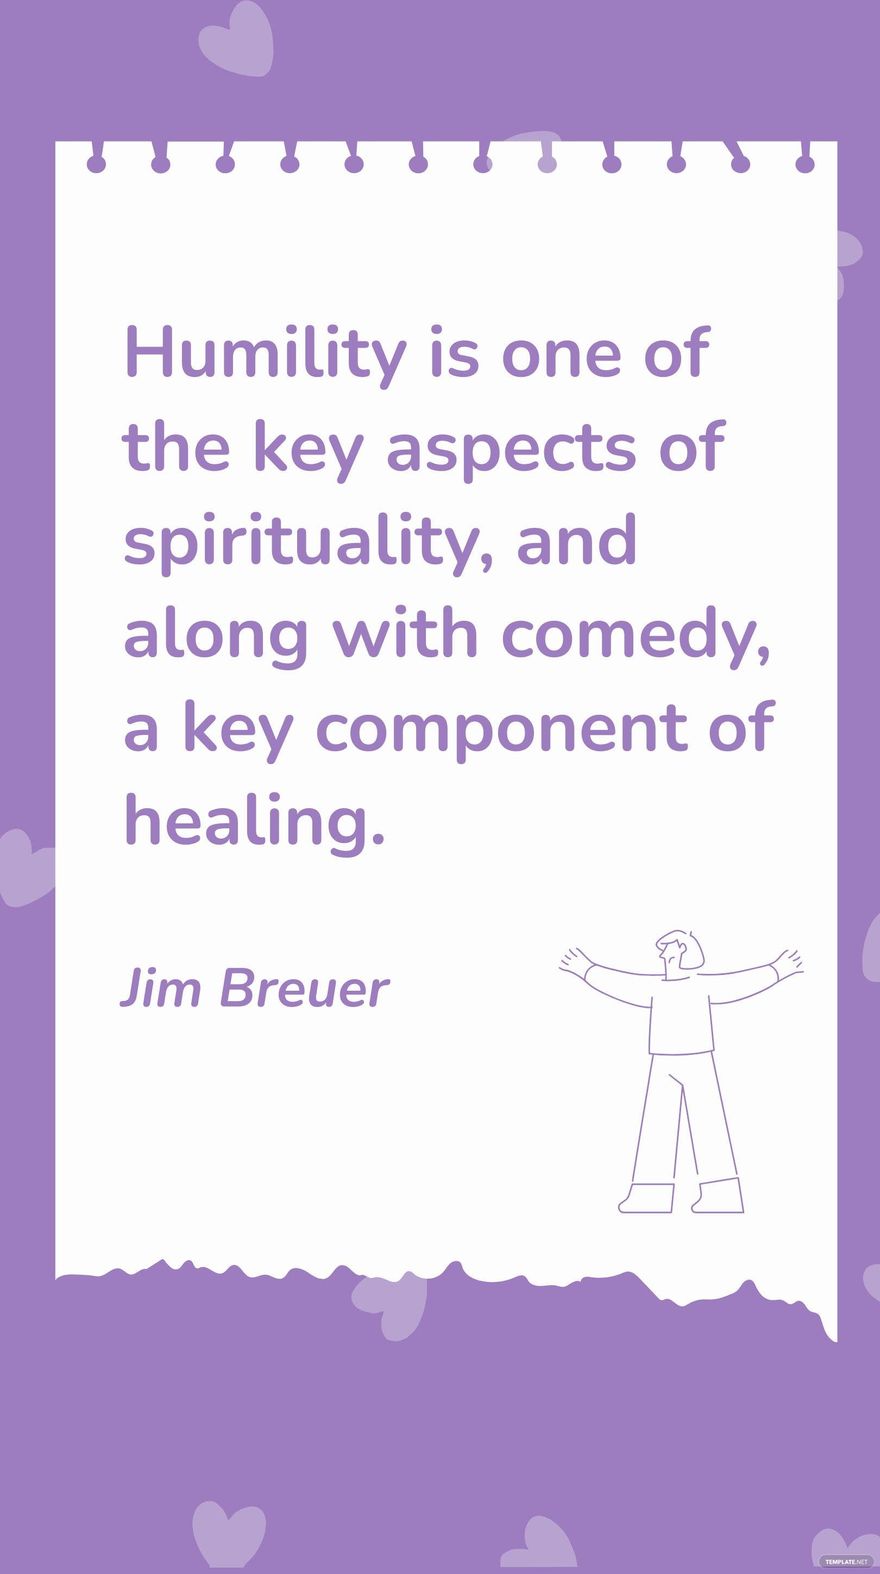 Jim Breuer - Humility is one of the key aspects of spirituality, and along with comedy, a key component of healing. in JPG